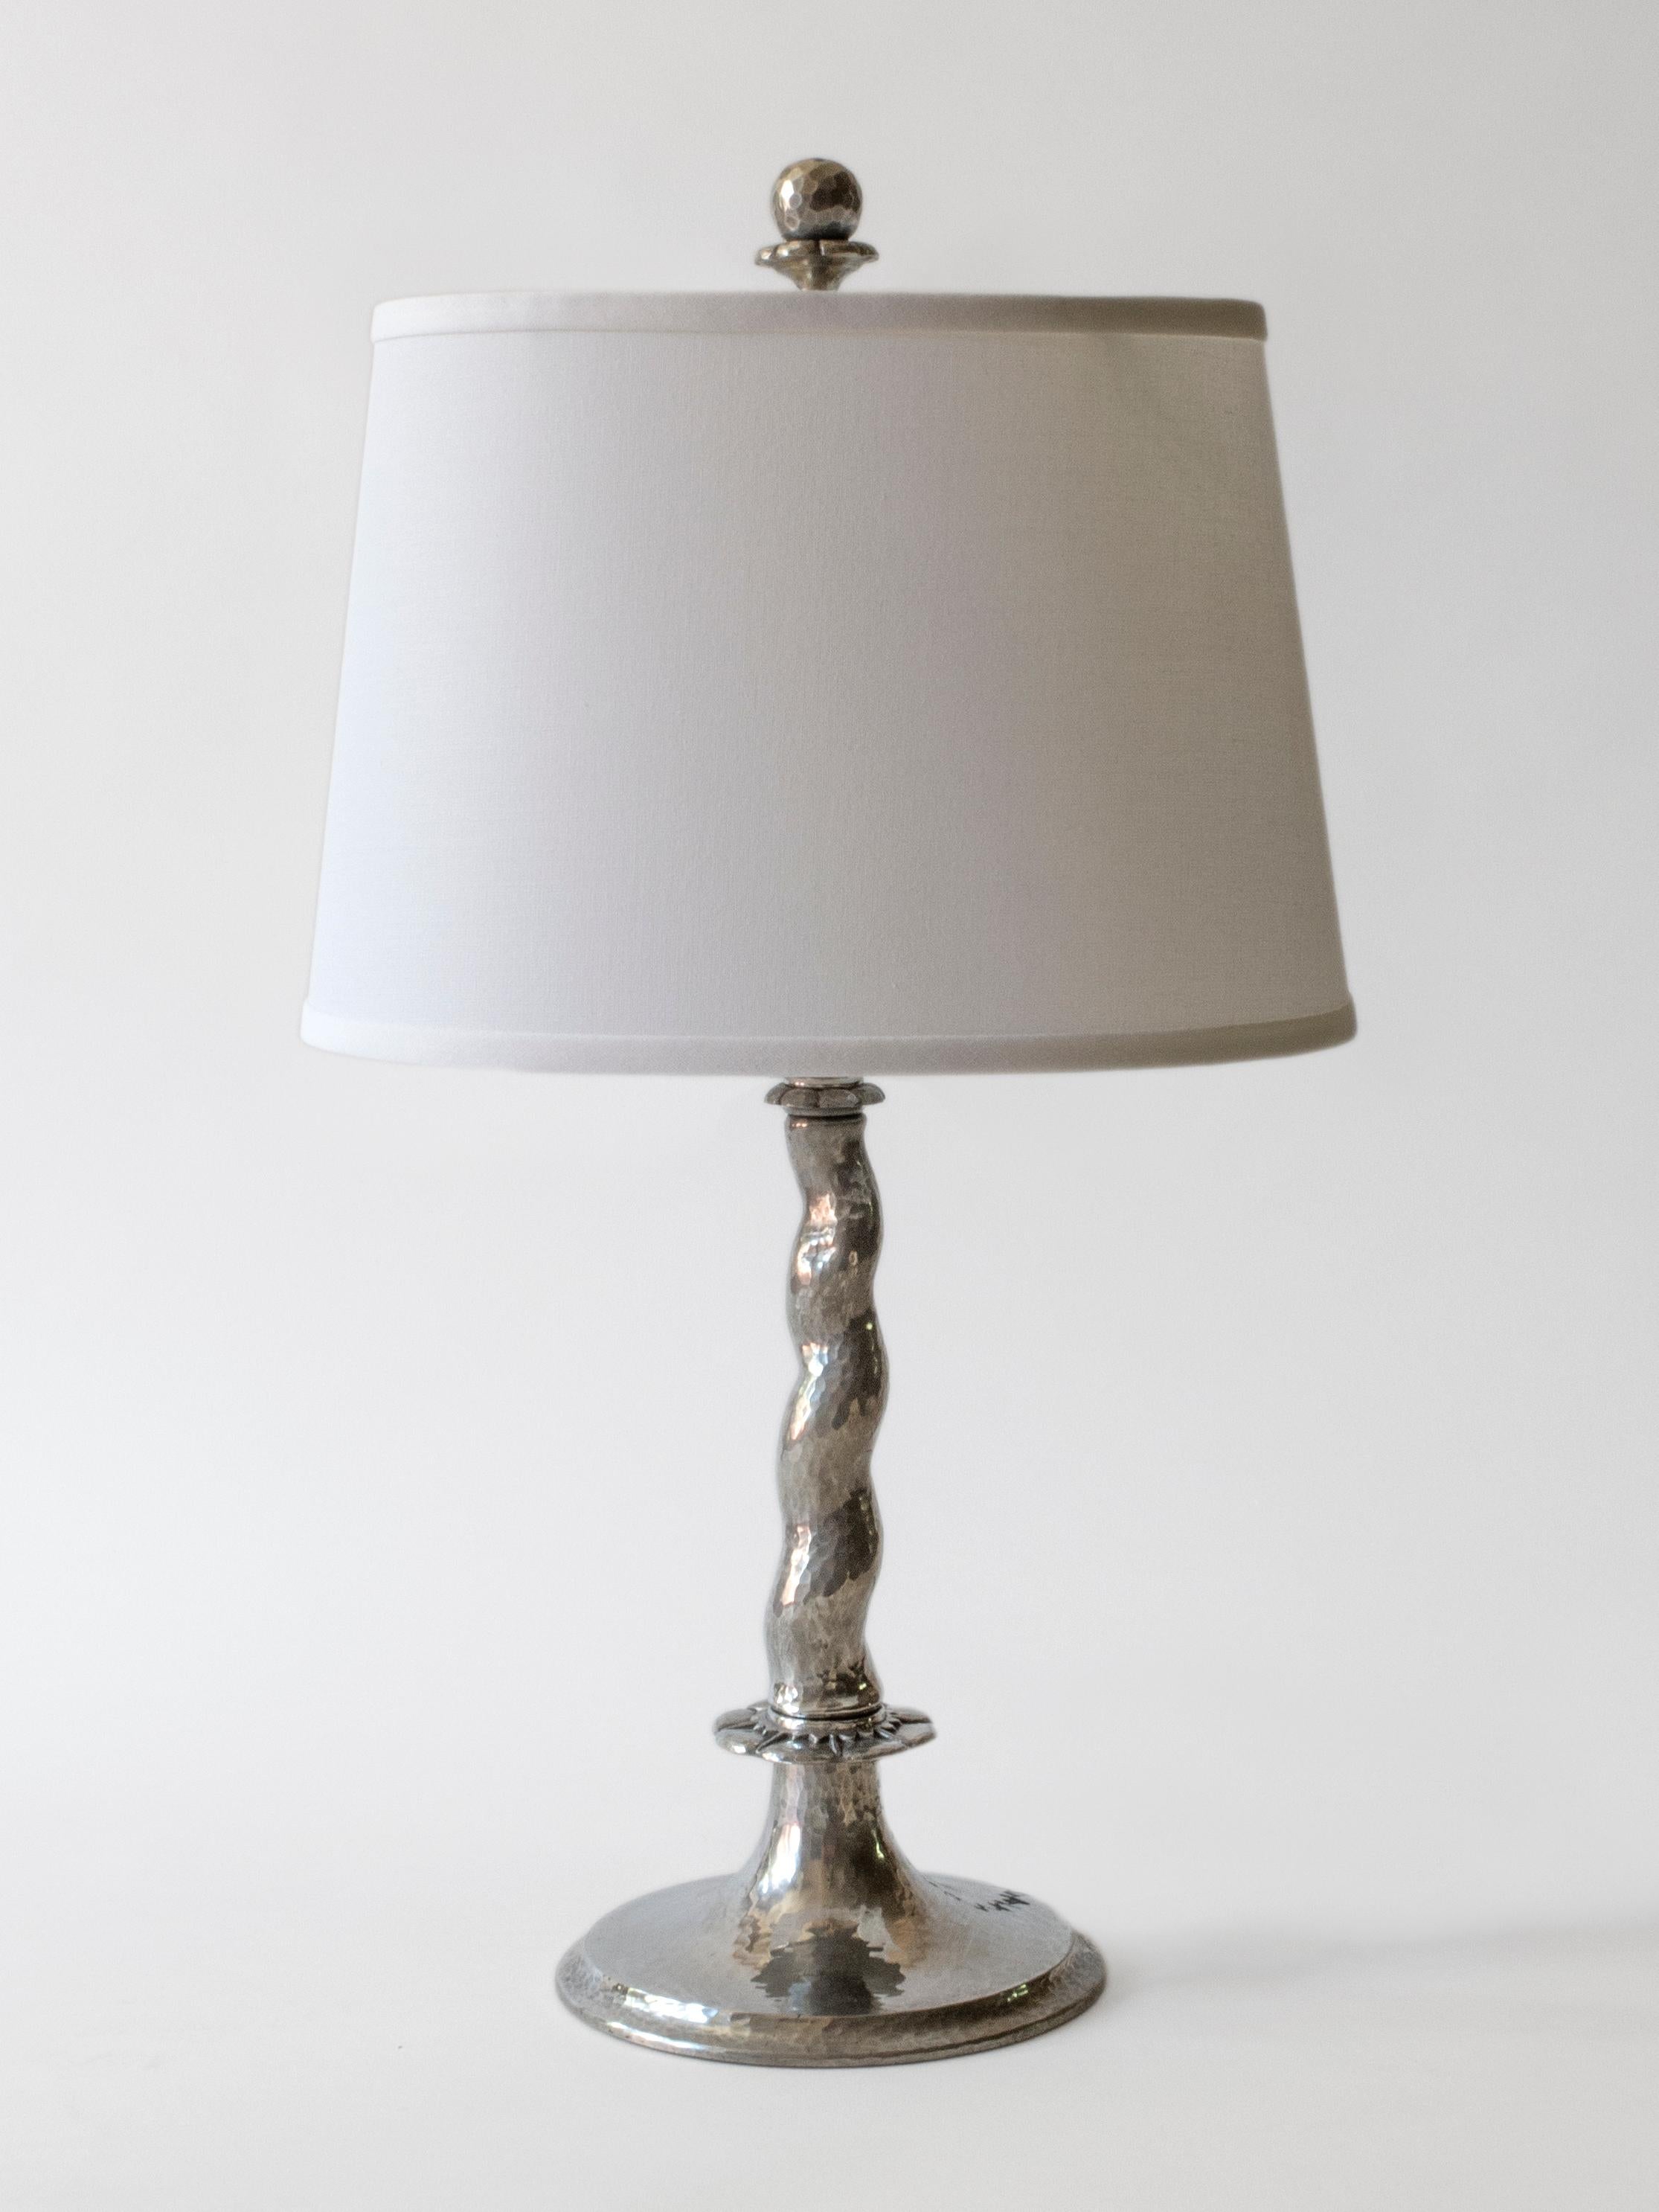 Each finial depicting a raised globe on a hourglass shaped blossom, surmounting a barley-twist stem, resting on a stylized rosette, terminating in a circular foot. 

Each lamp hammered throughout and with minor handmade differences. The overall